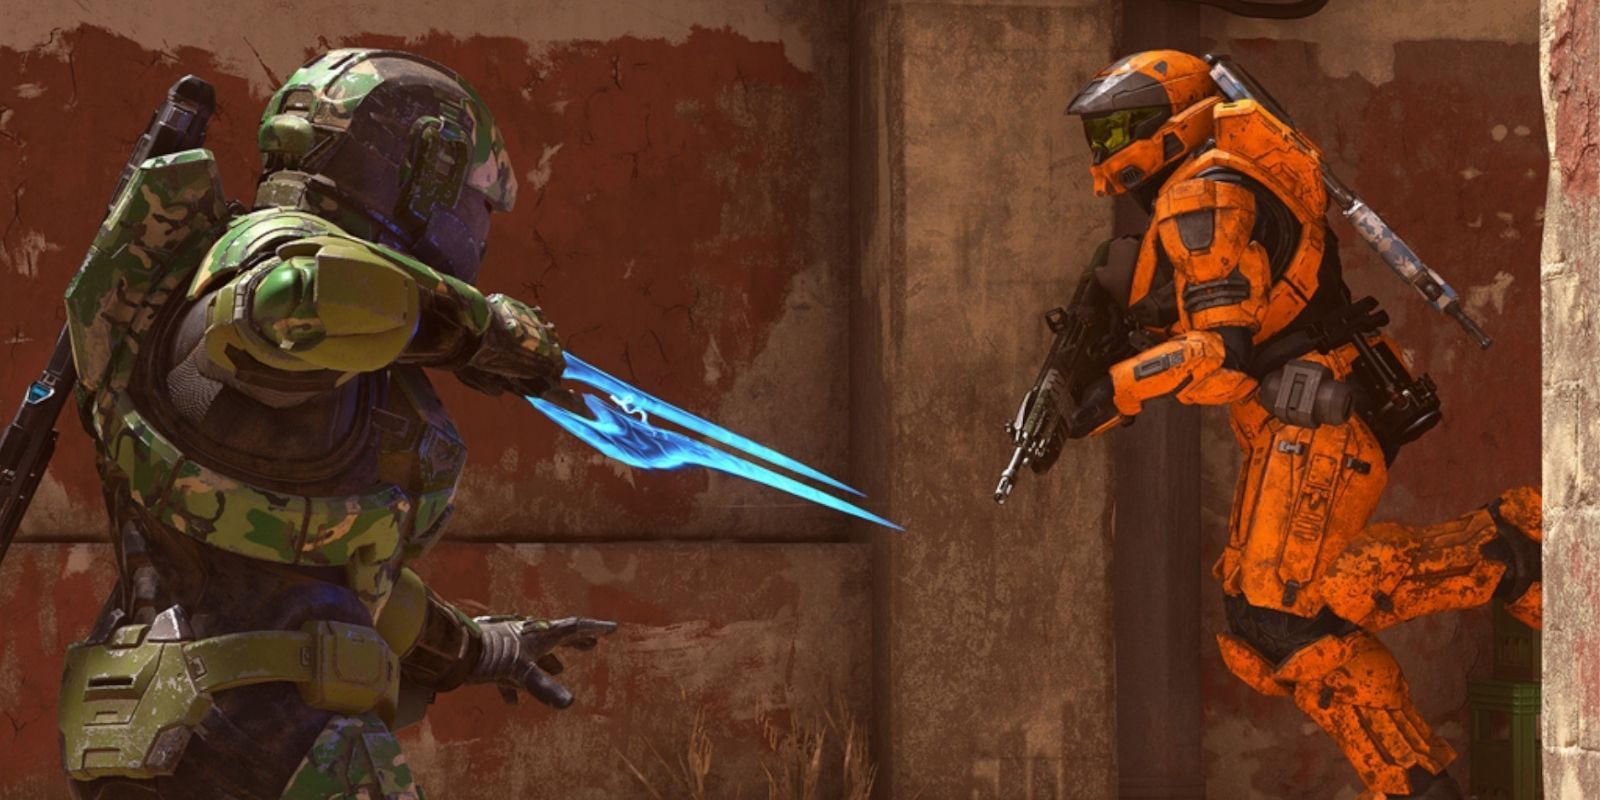 Two Spartans in combat, one wearing green armor and brandishing an energy sword, the other decked out in orange with an assault rifle